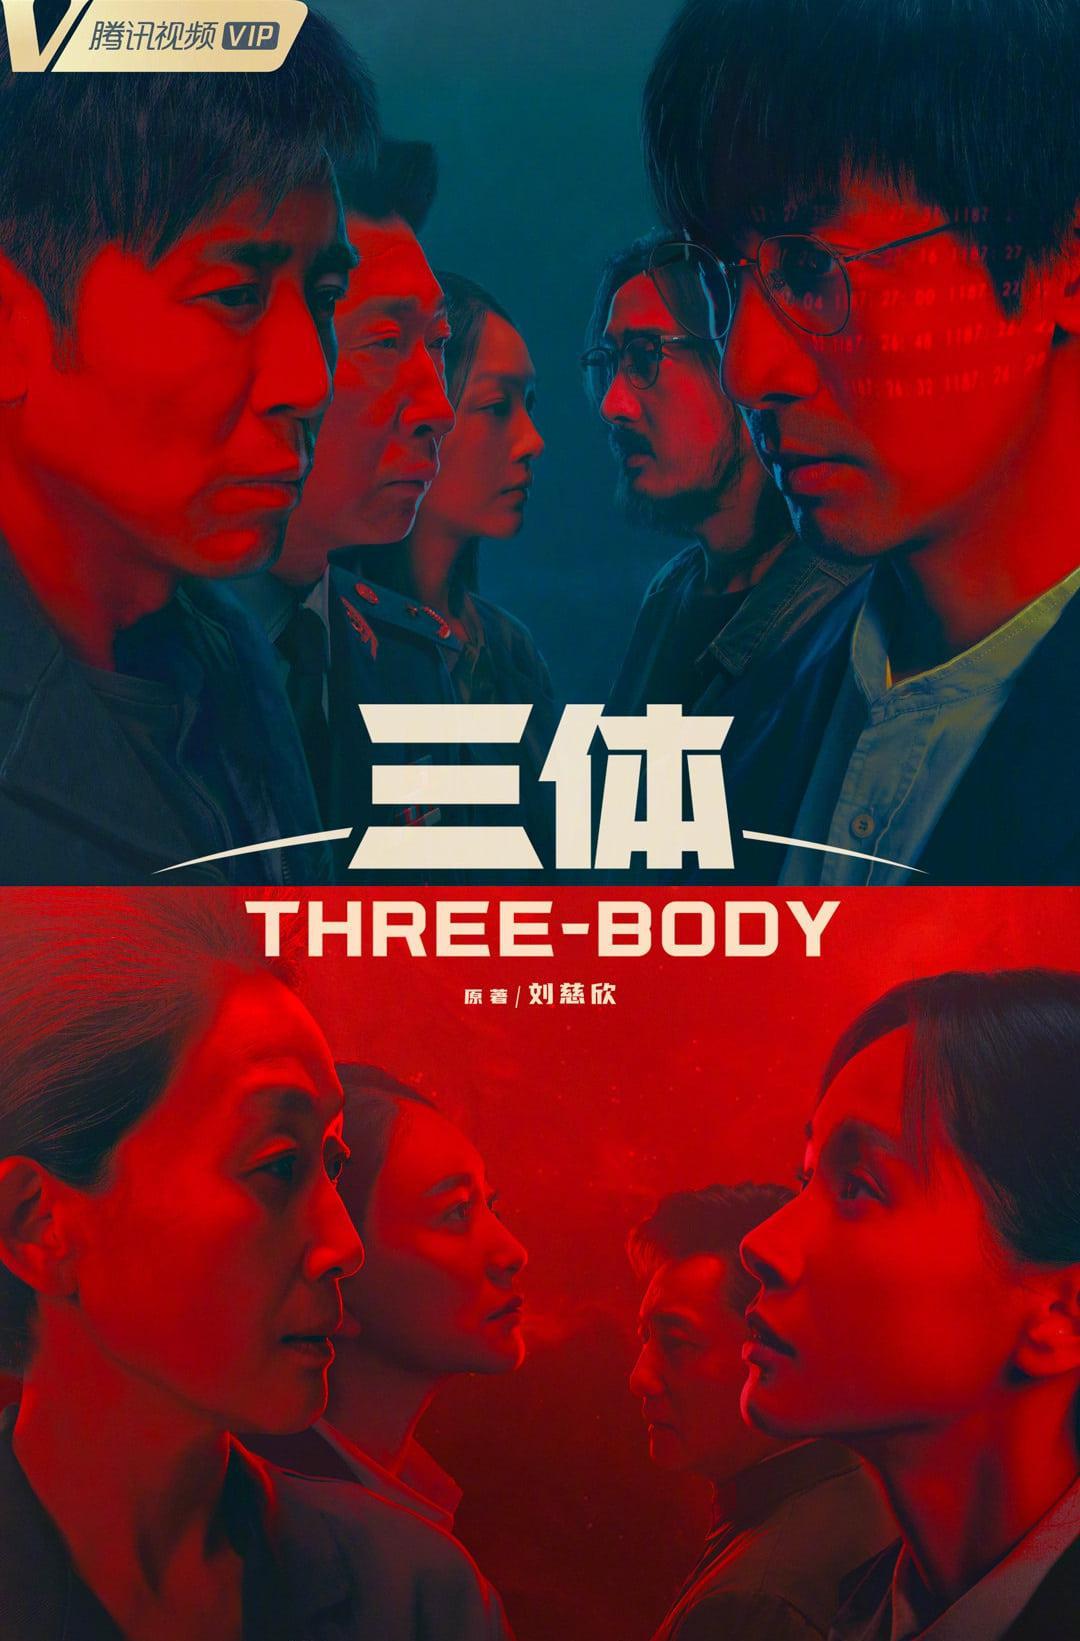 TV ratings for Three-Body (三体) in Italy. Tencent Video TV series